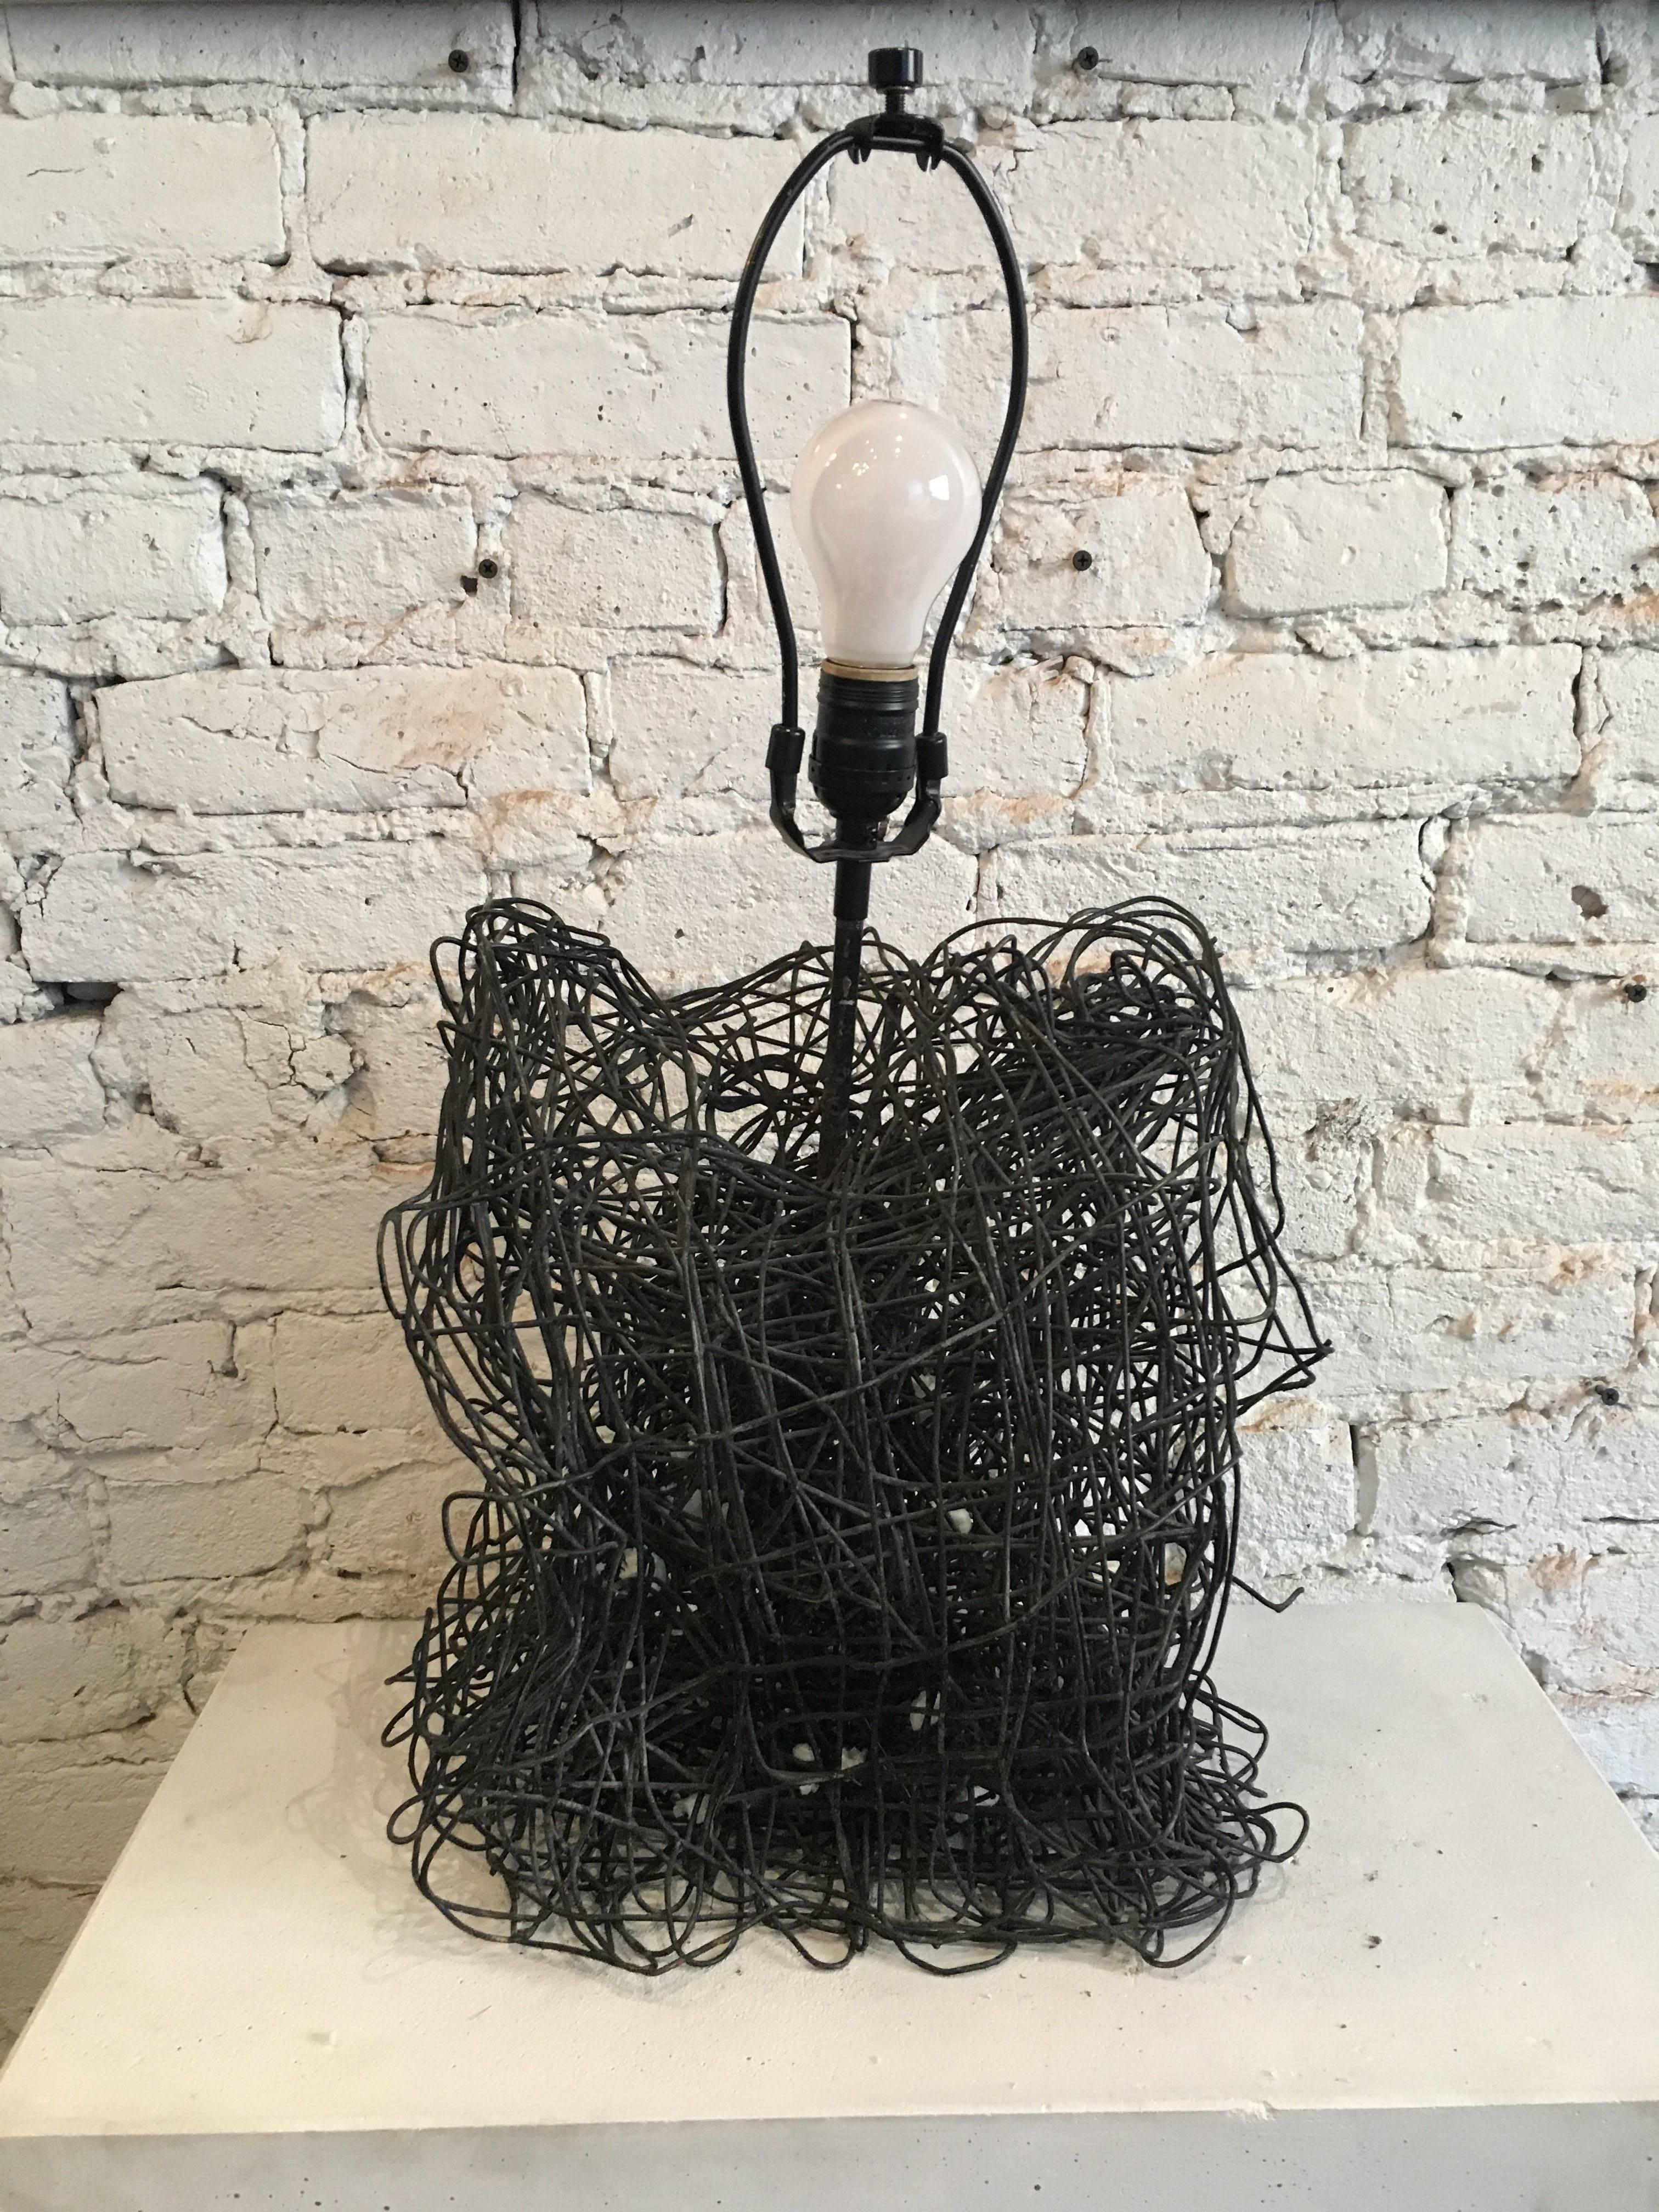 20th century sculptural wire lamp with custom French paper shade
This artisan piece is a one of a kind wire sculpture which has been fabricated into a lamp base. Wired and shaded with a custom French paper shade

Dimensions with shade - 22.5 in H